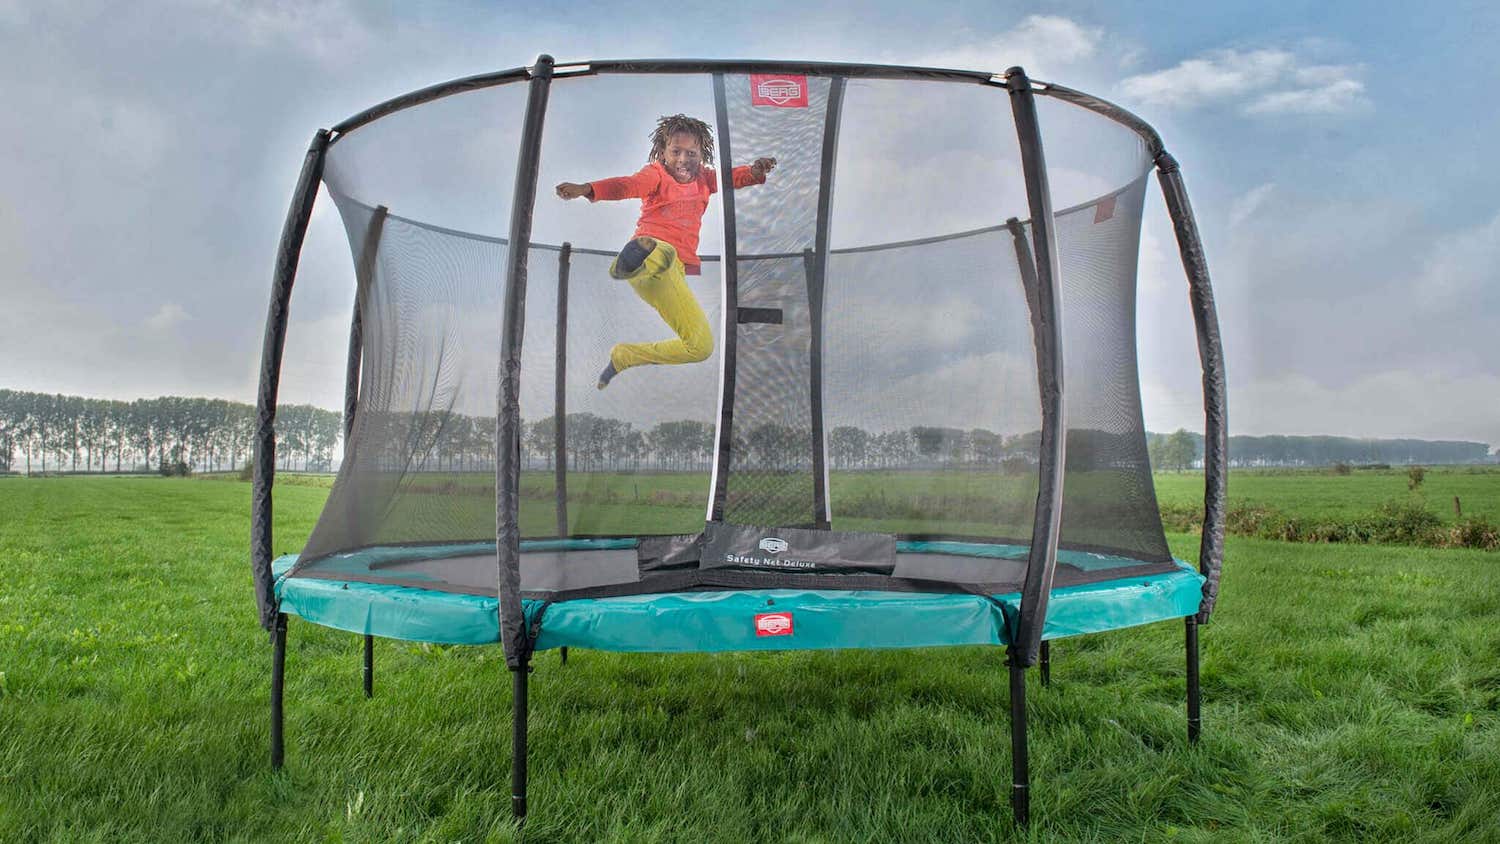 Trampolines- Fun & Active with Physical and Mental Health Benefits!